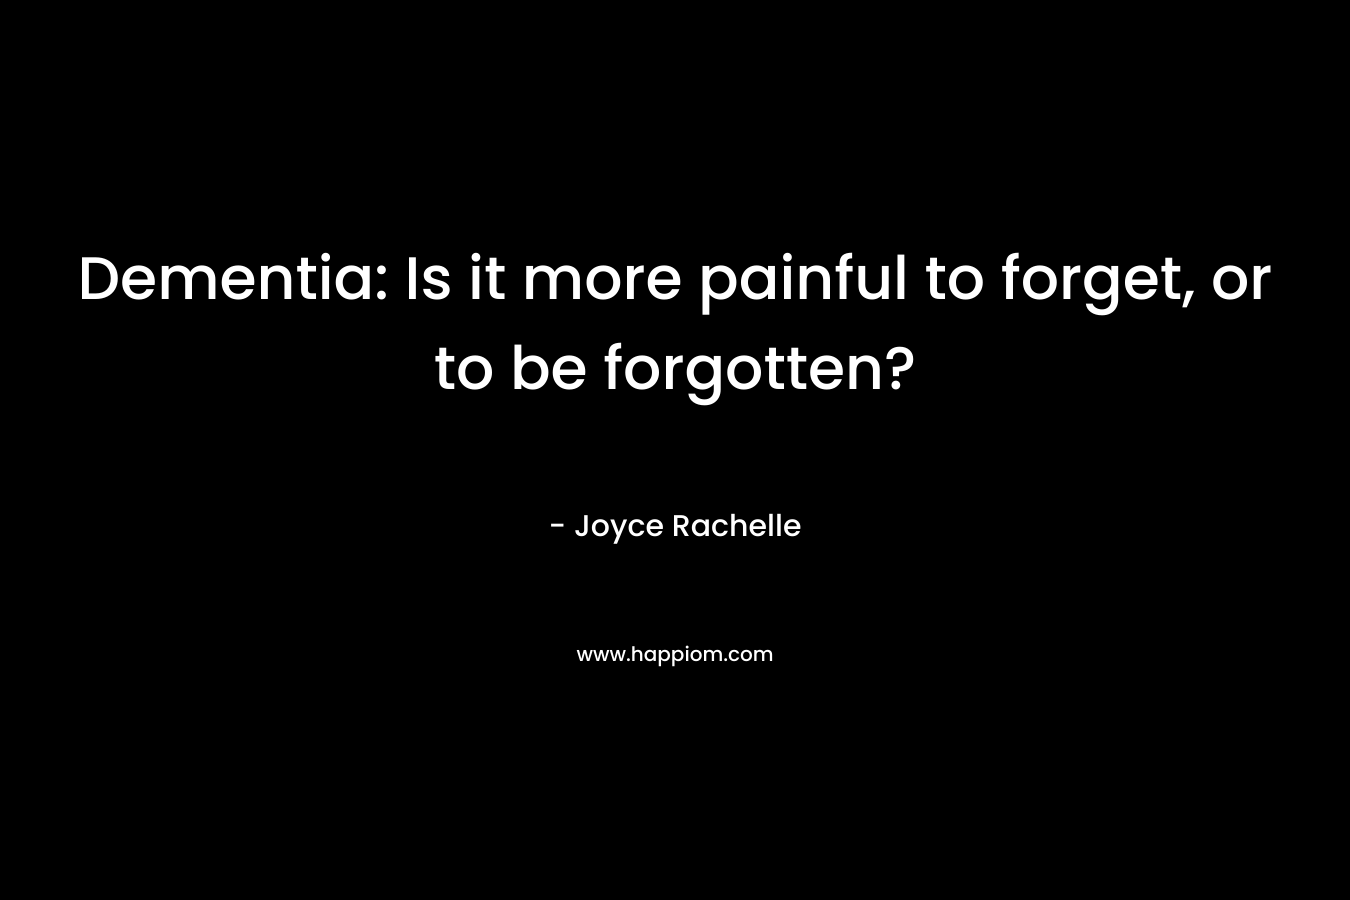 Dementia: Is it more painful to forget, or to be forgotten? – Joyce Rachelle